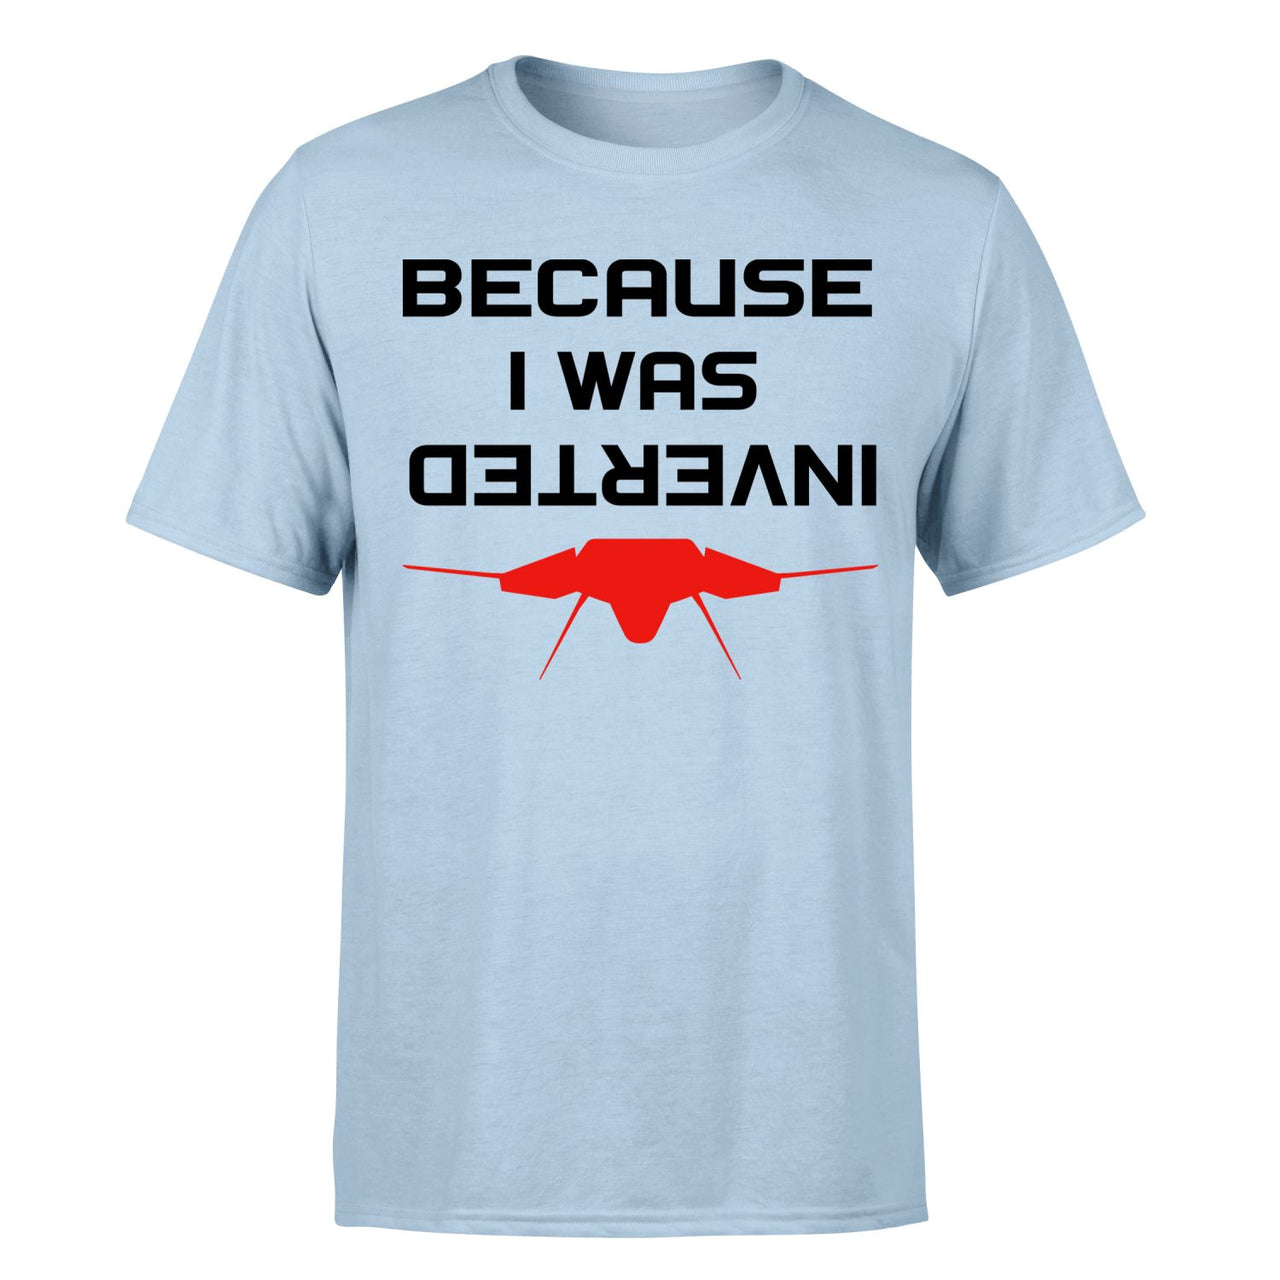 Because I was Inverted Designed T-Shirts